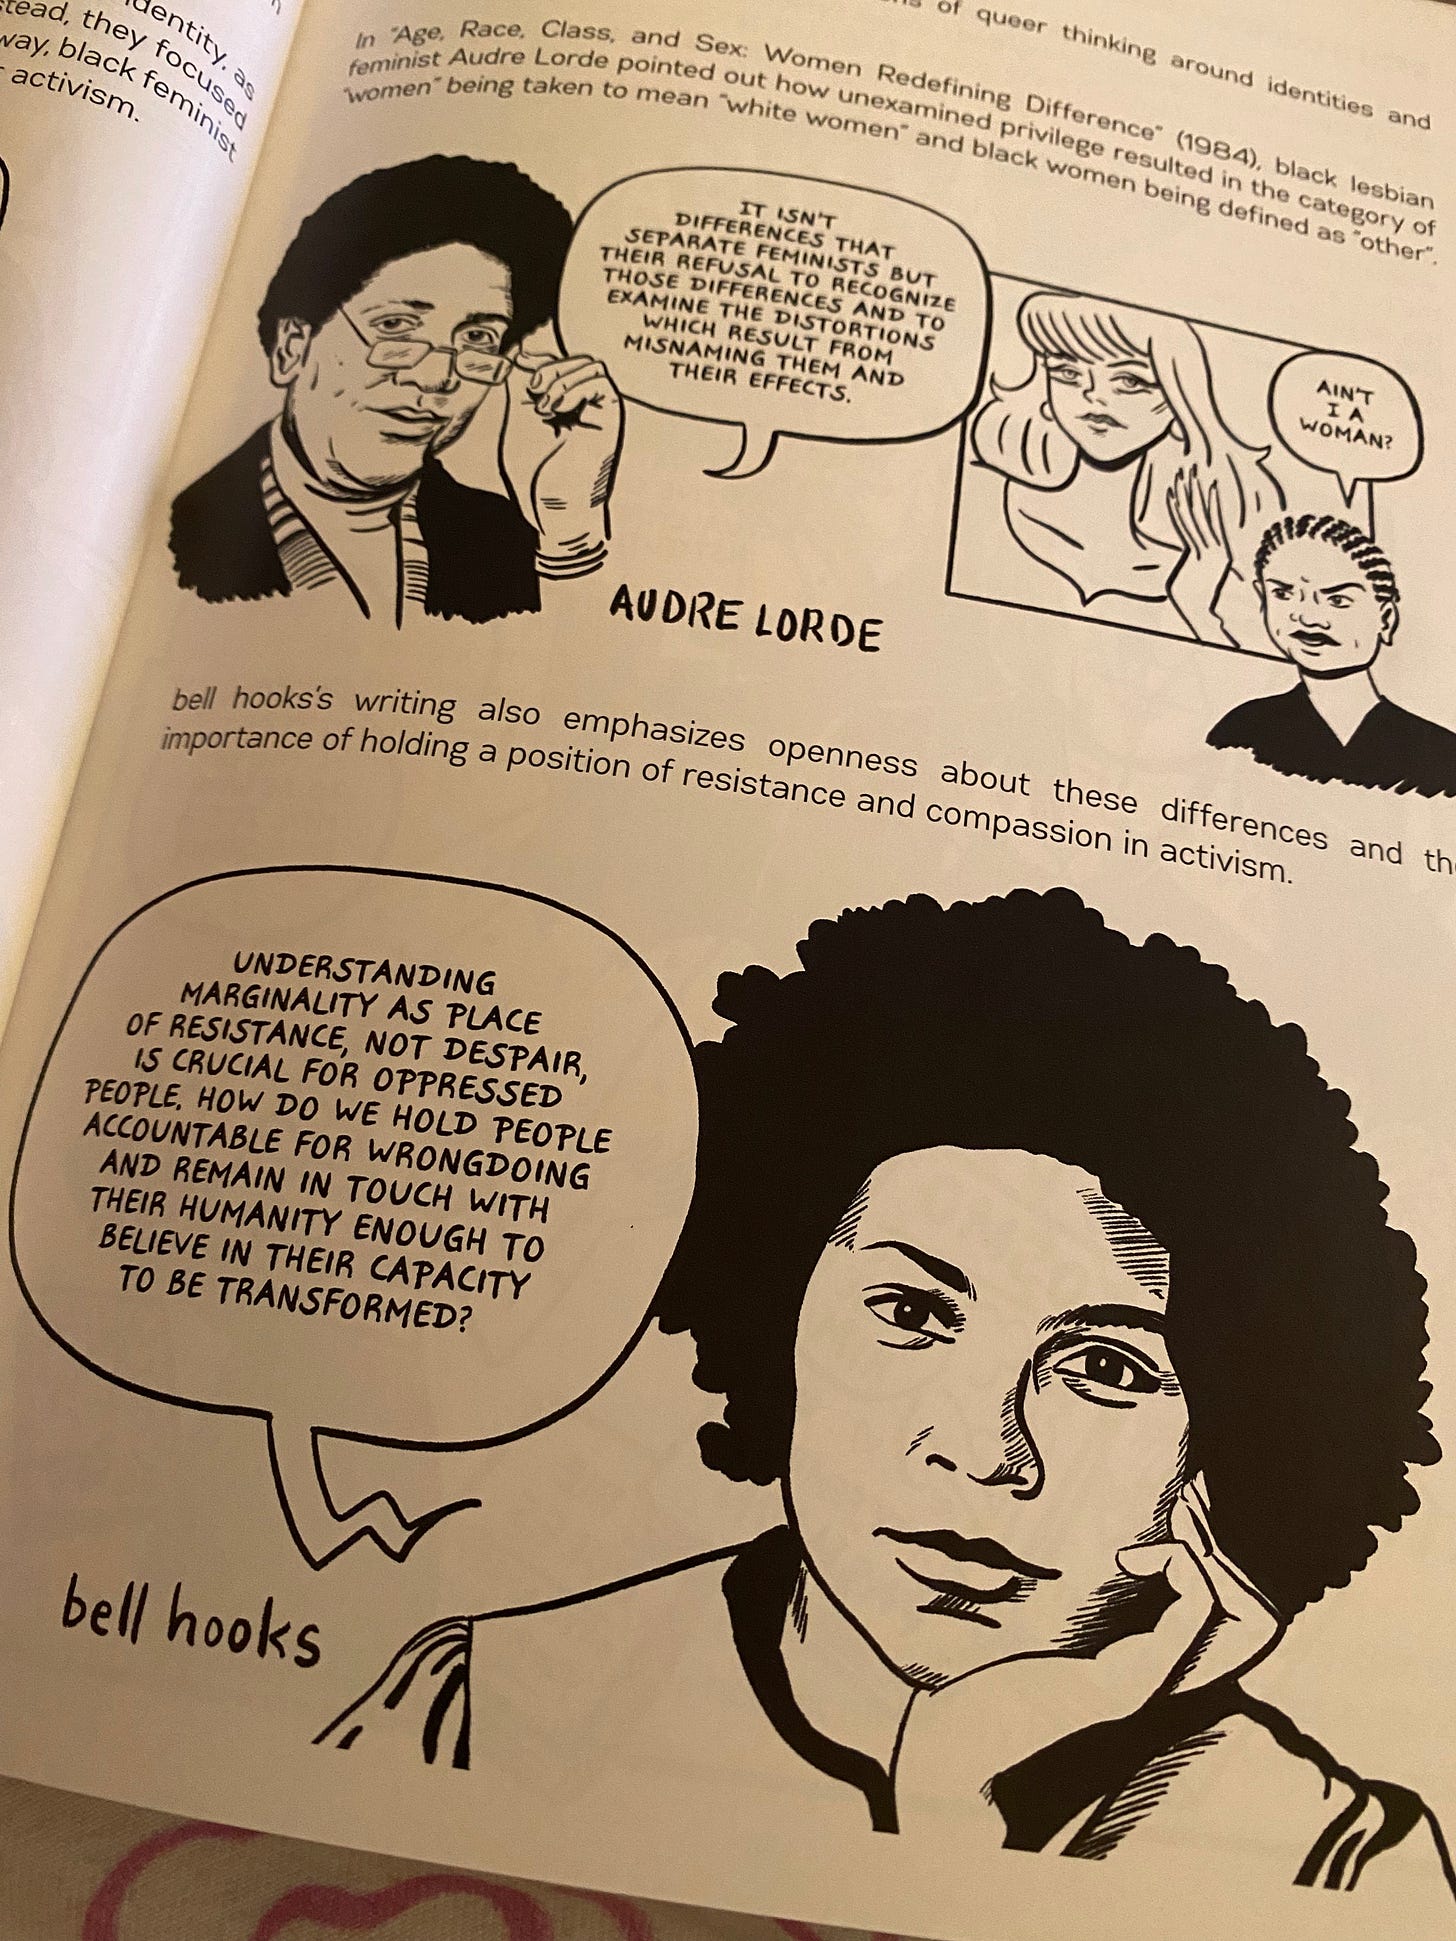 bell hooks says, "understanding marginality as place of resistance, not despair, is crucial for oppressed people, how do we hold people accountable for wrongdoing and remain in touch with their humanity enough to believe in their capacity to be transformed?"